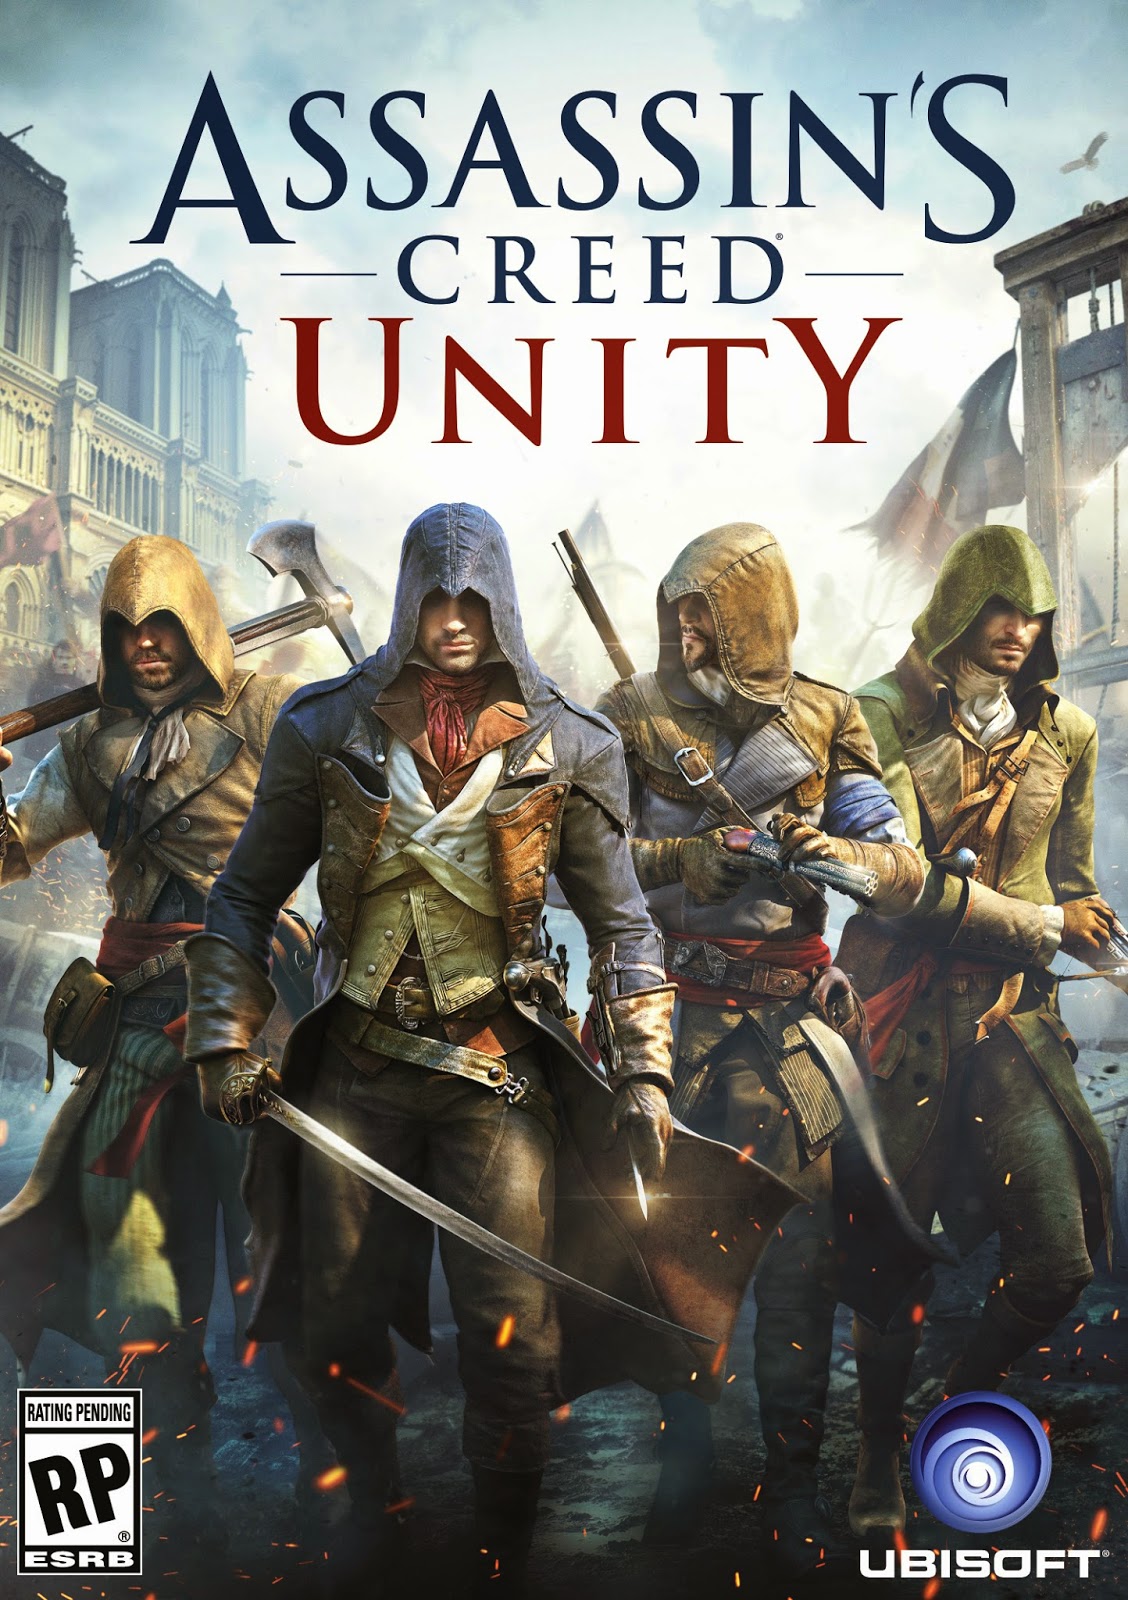 Assassins.Creed.Unity.Gold.Edition.Multi.15.Cracked-3DM License Key